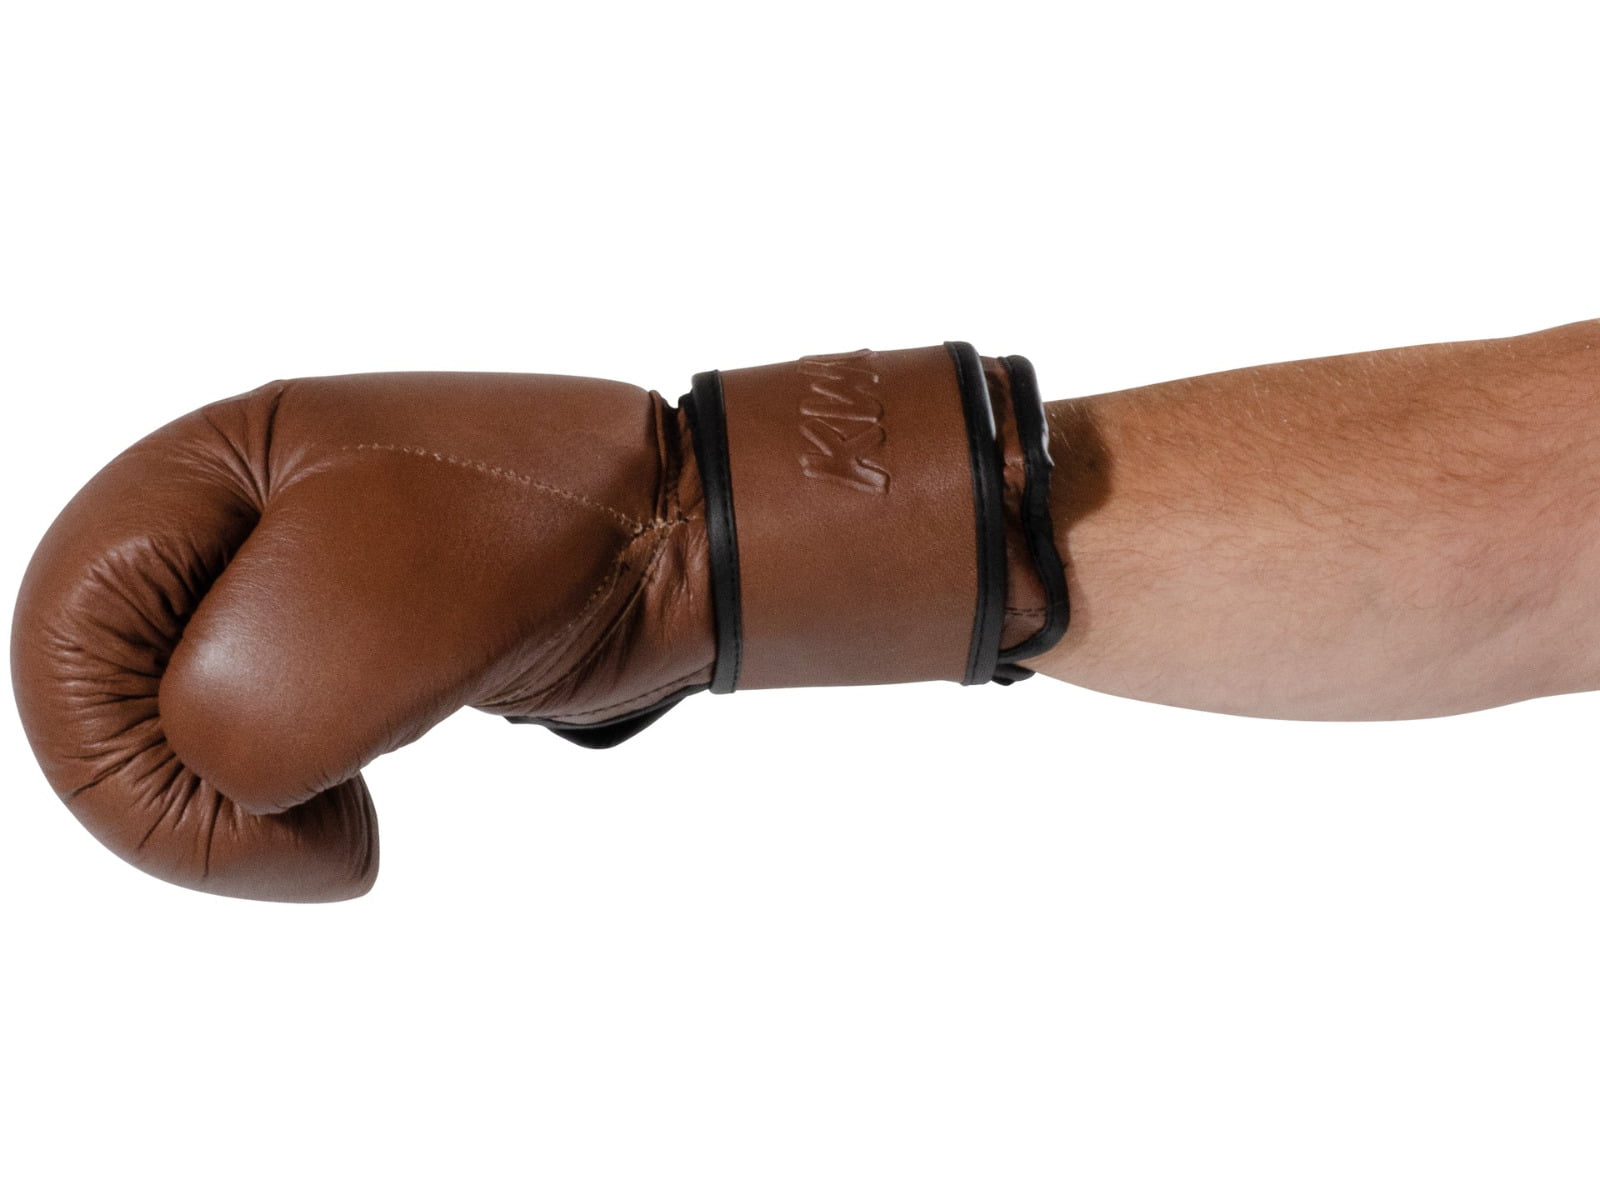 leather vintage / retro brown boxing gloves 4